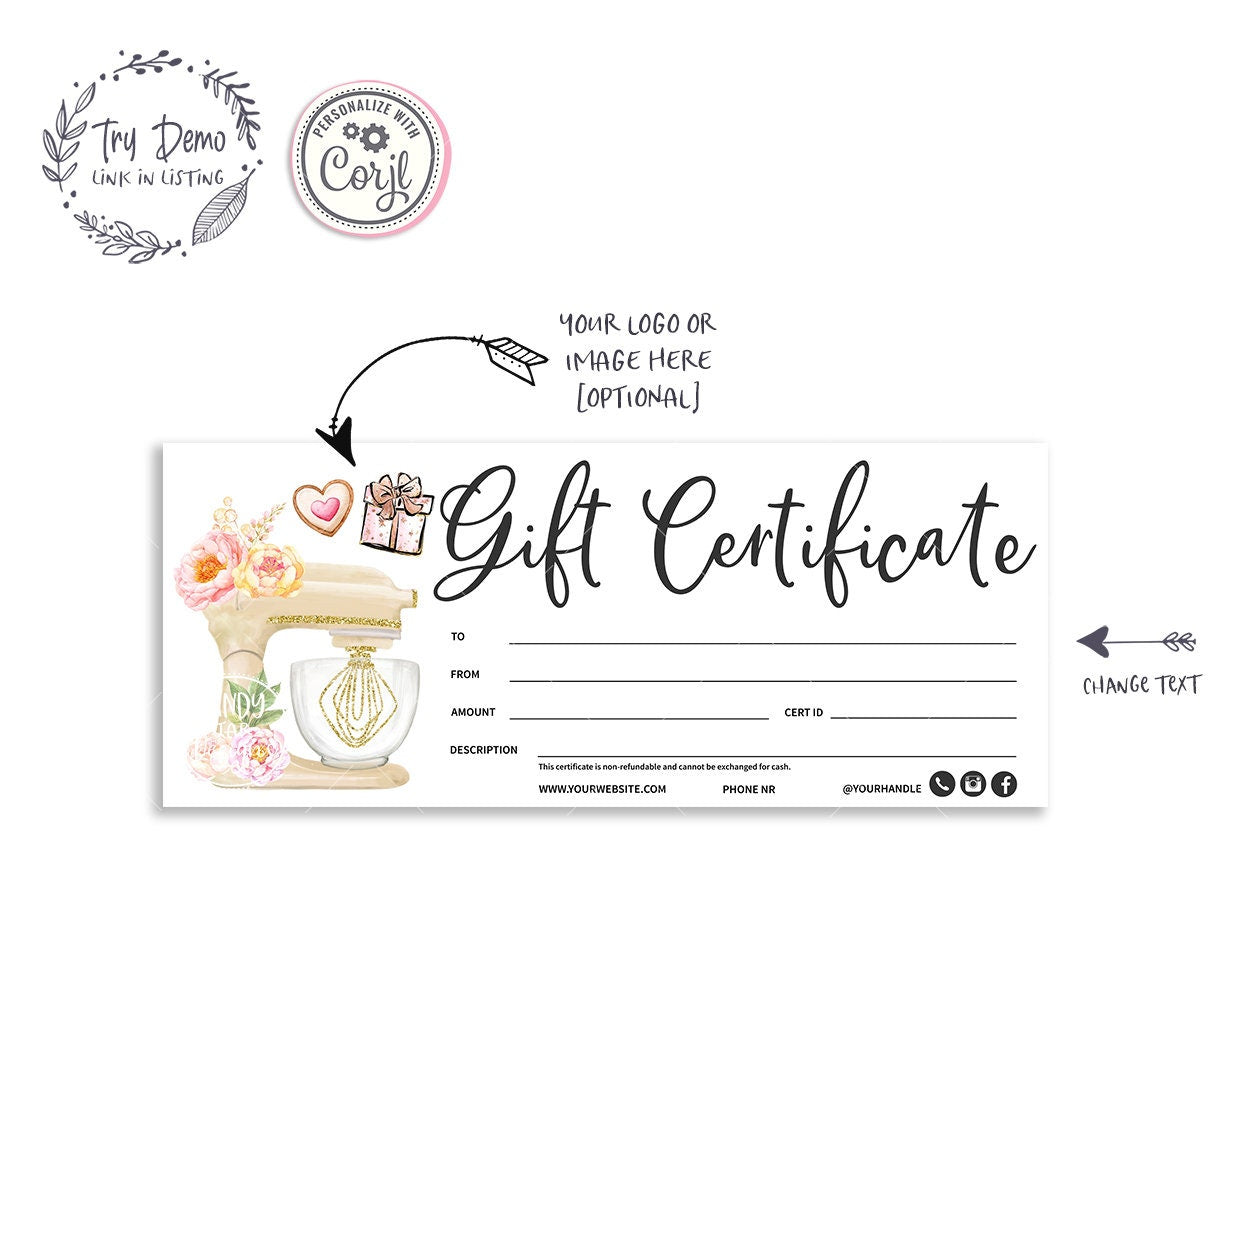 Bakery Gift Certificate for Bakery Shops, Kitchen Mixer - Candy Jar Studios